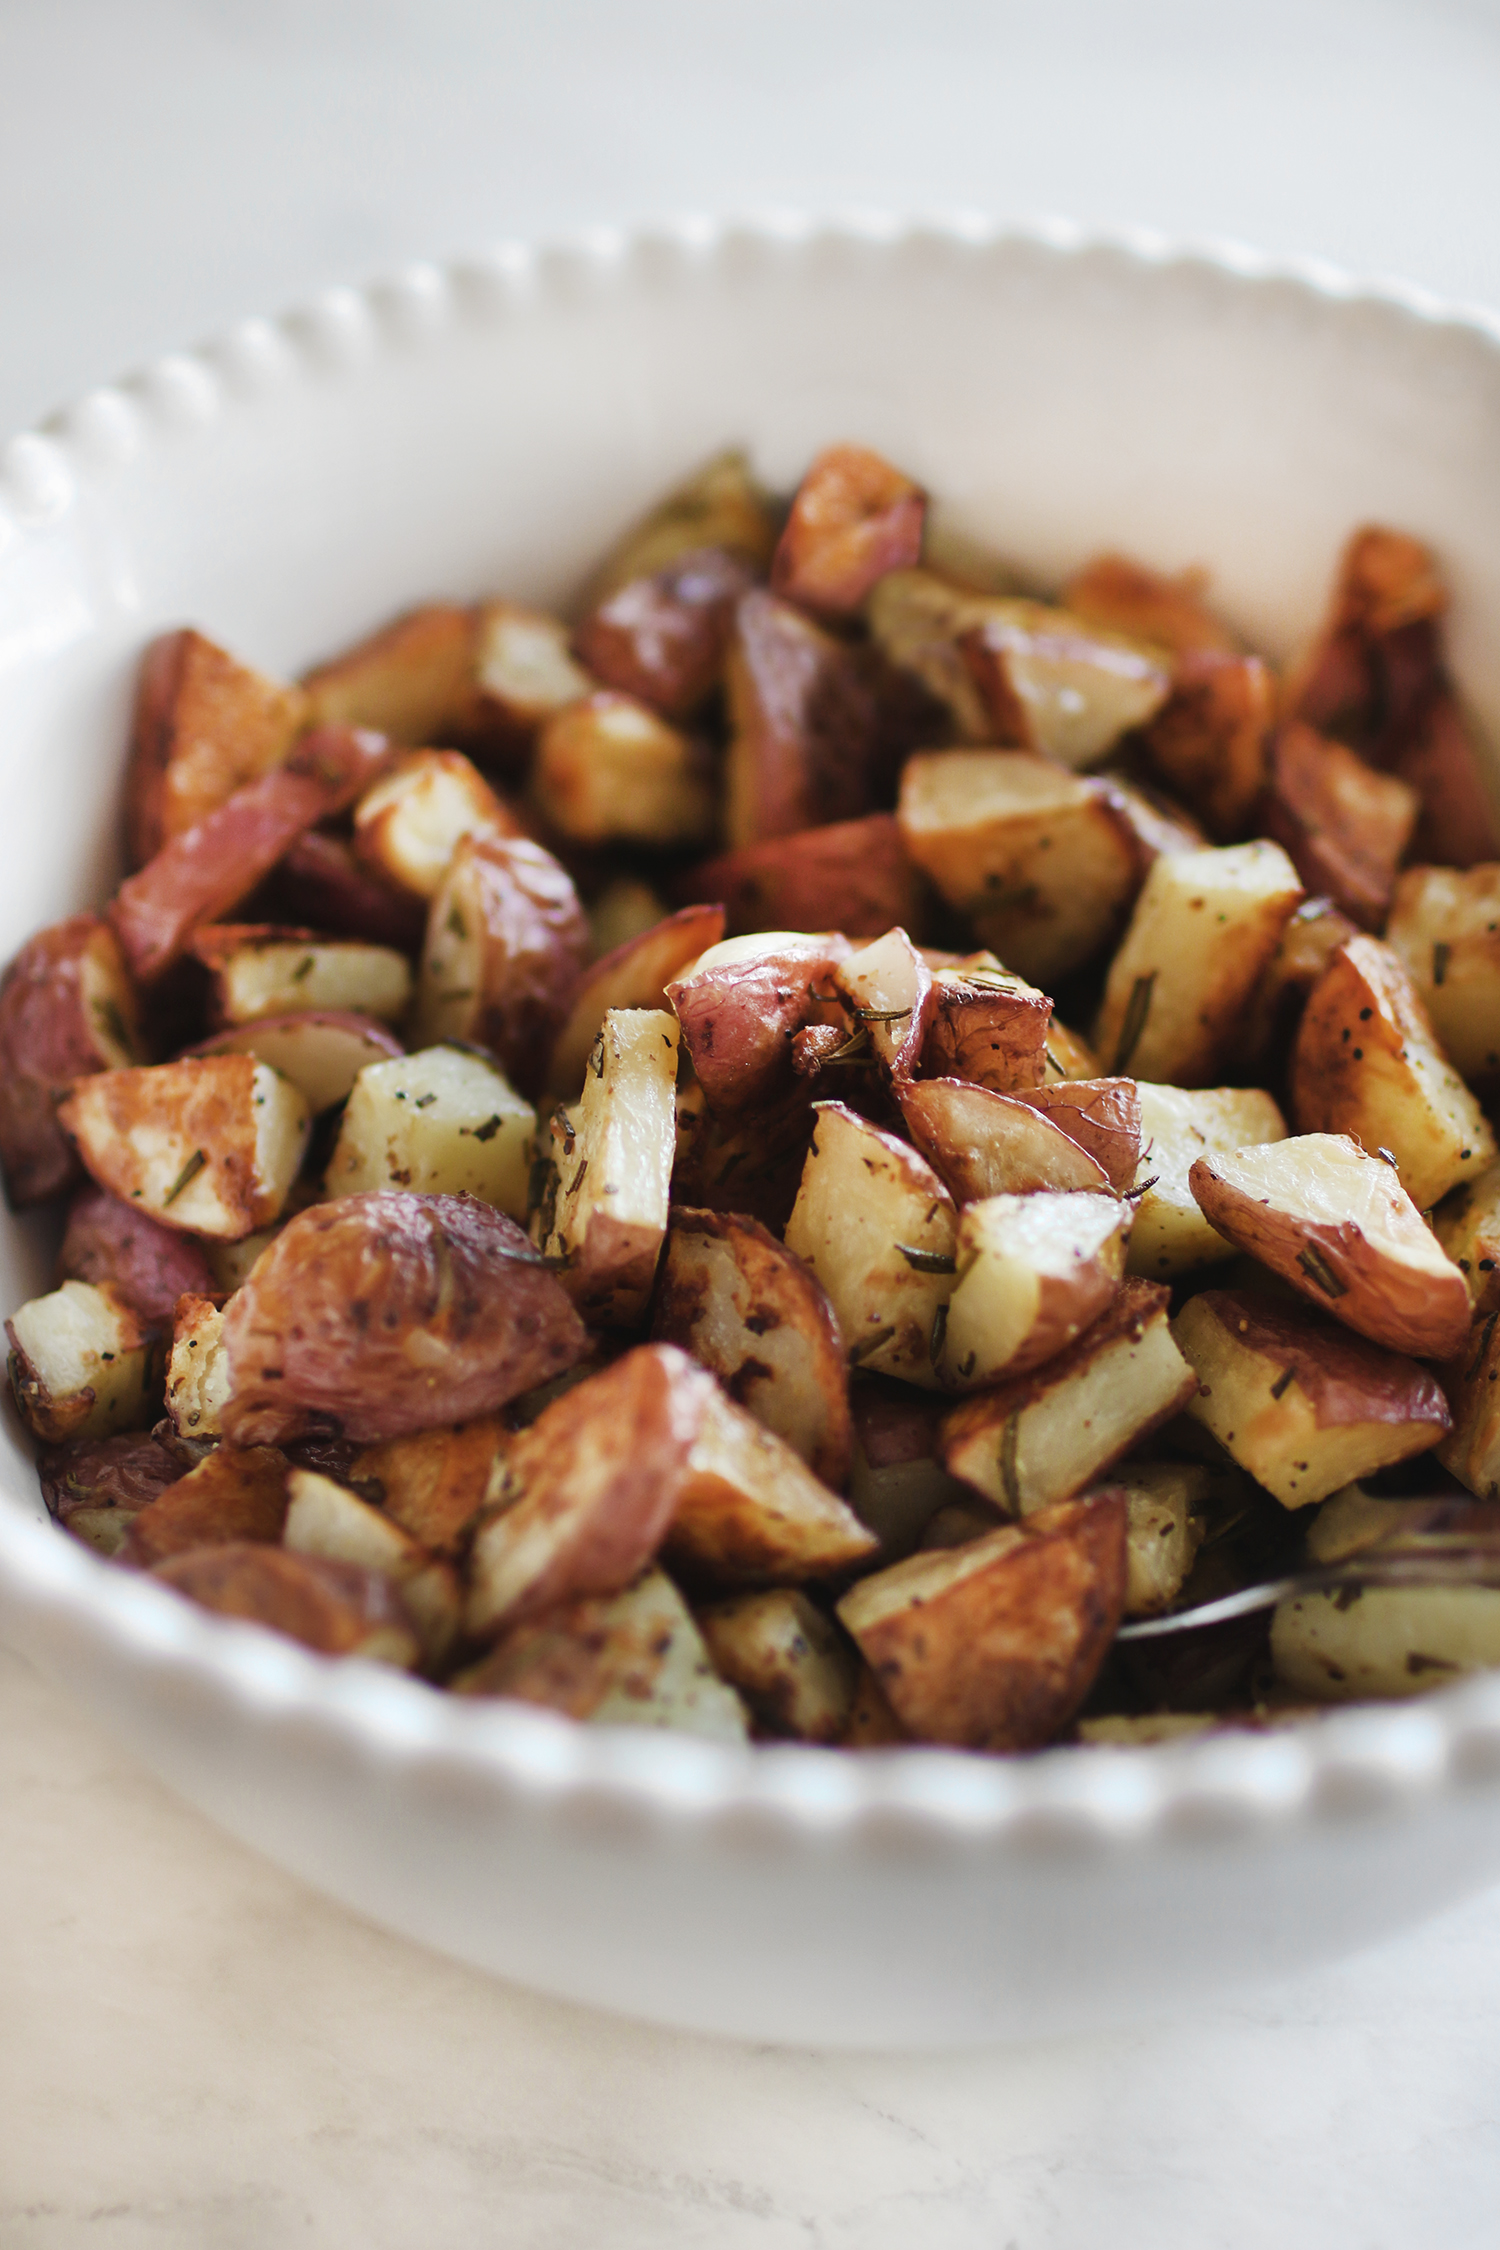 Roasted rosemary potatoes recipe - perfect for Easter dinner and absolutely fool proof. These make such a great side dish and bring the most beautiful taste to your plate! Catch the full recipe and walk through over on KaraLayne.com! #EasterDinnerIdeas #EasterDinnerSideDish #SideDish #Recipe #PotatoSideDishes #EasyPotatoSideDishes #RoastedPotatoes #RosemaryPotatoes #EasyRecipes